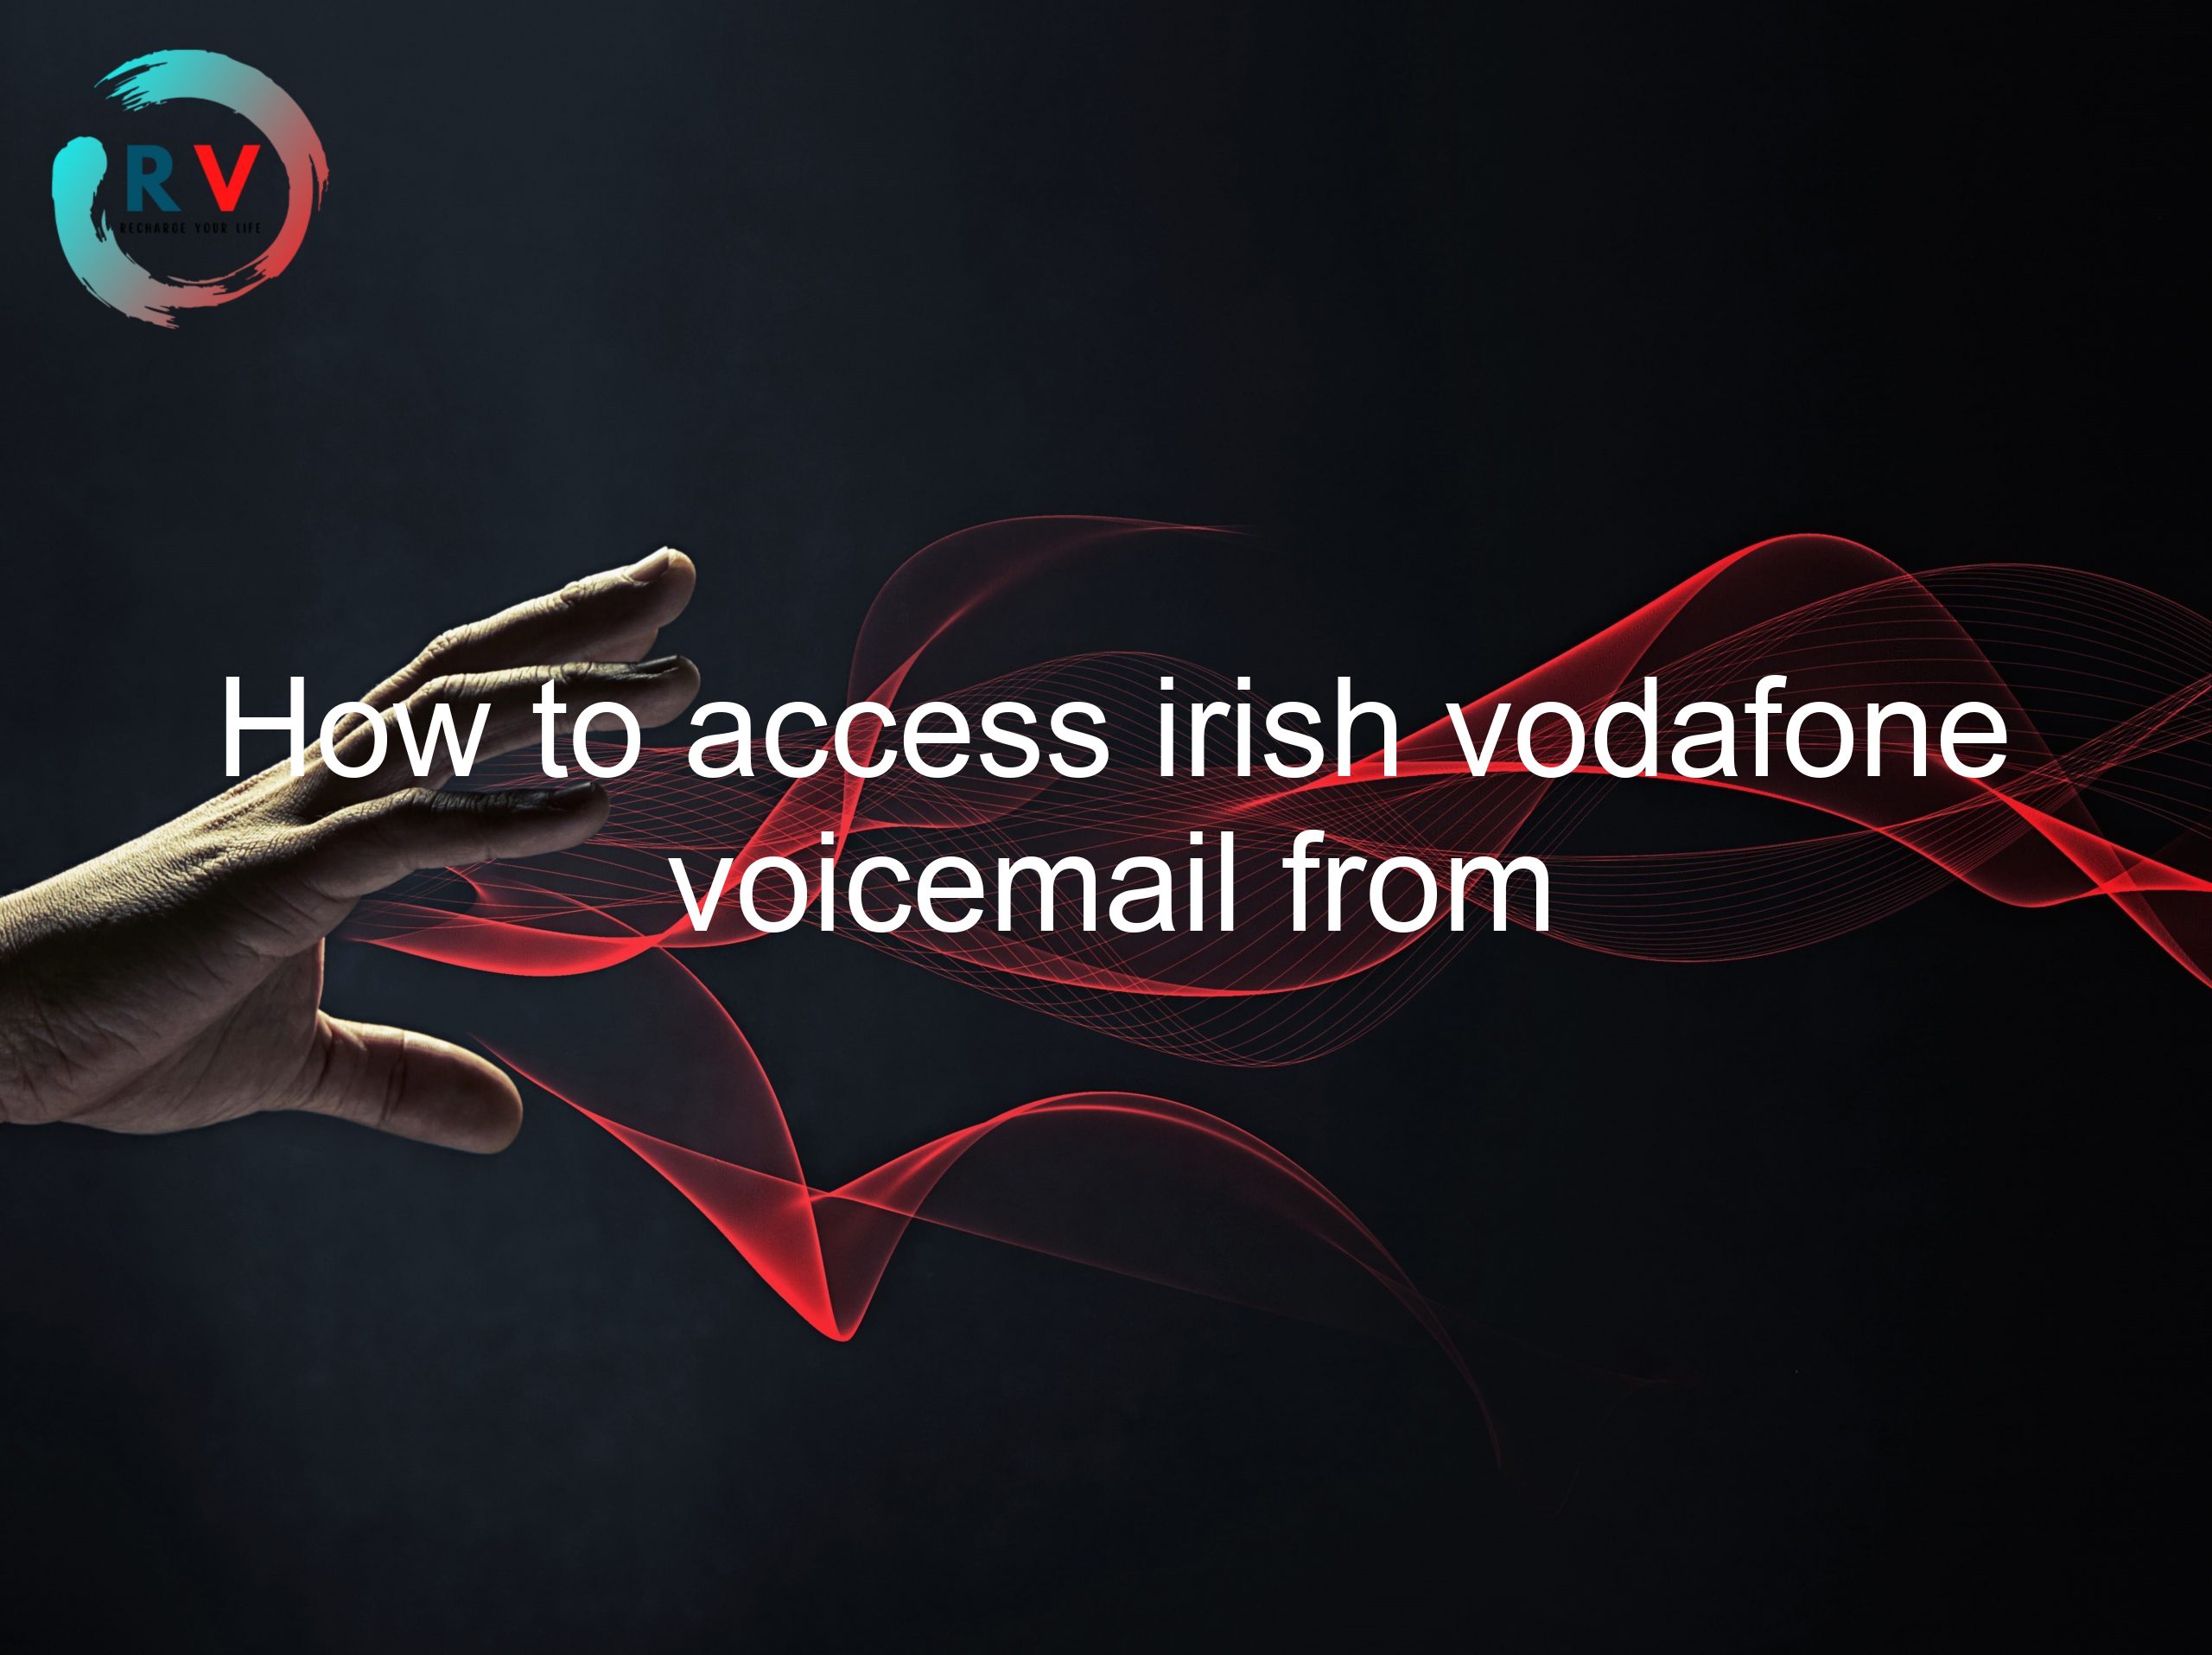 How to access irish vodafone voicemail from abroad: The definitive guide